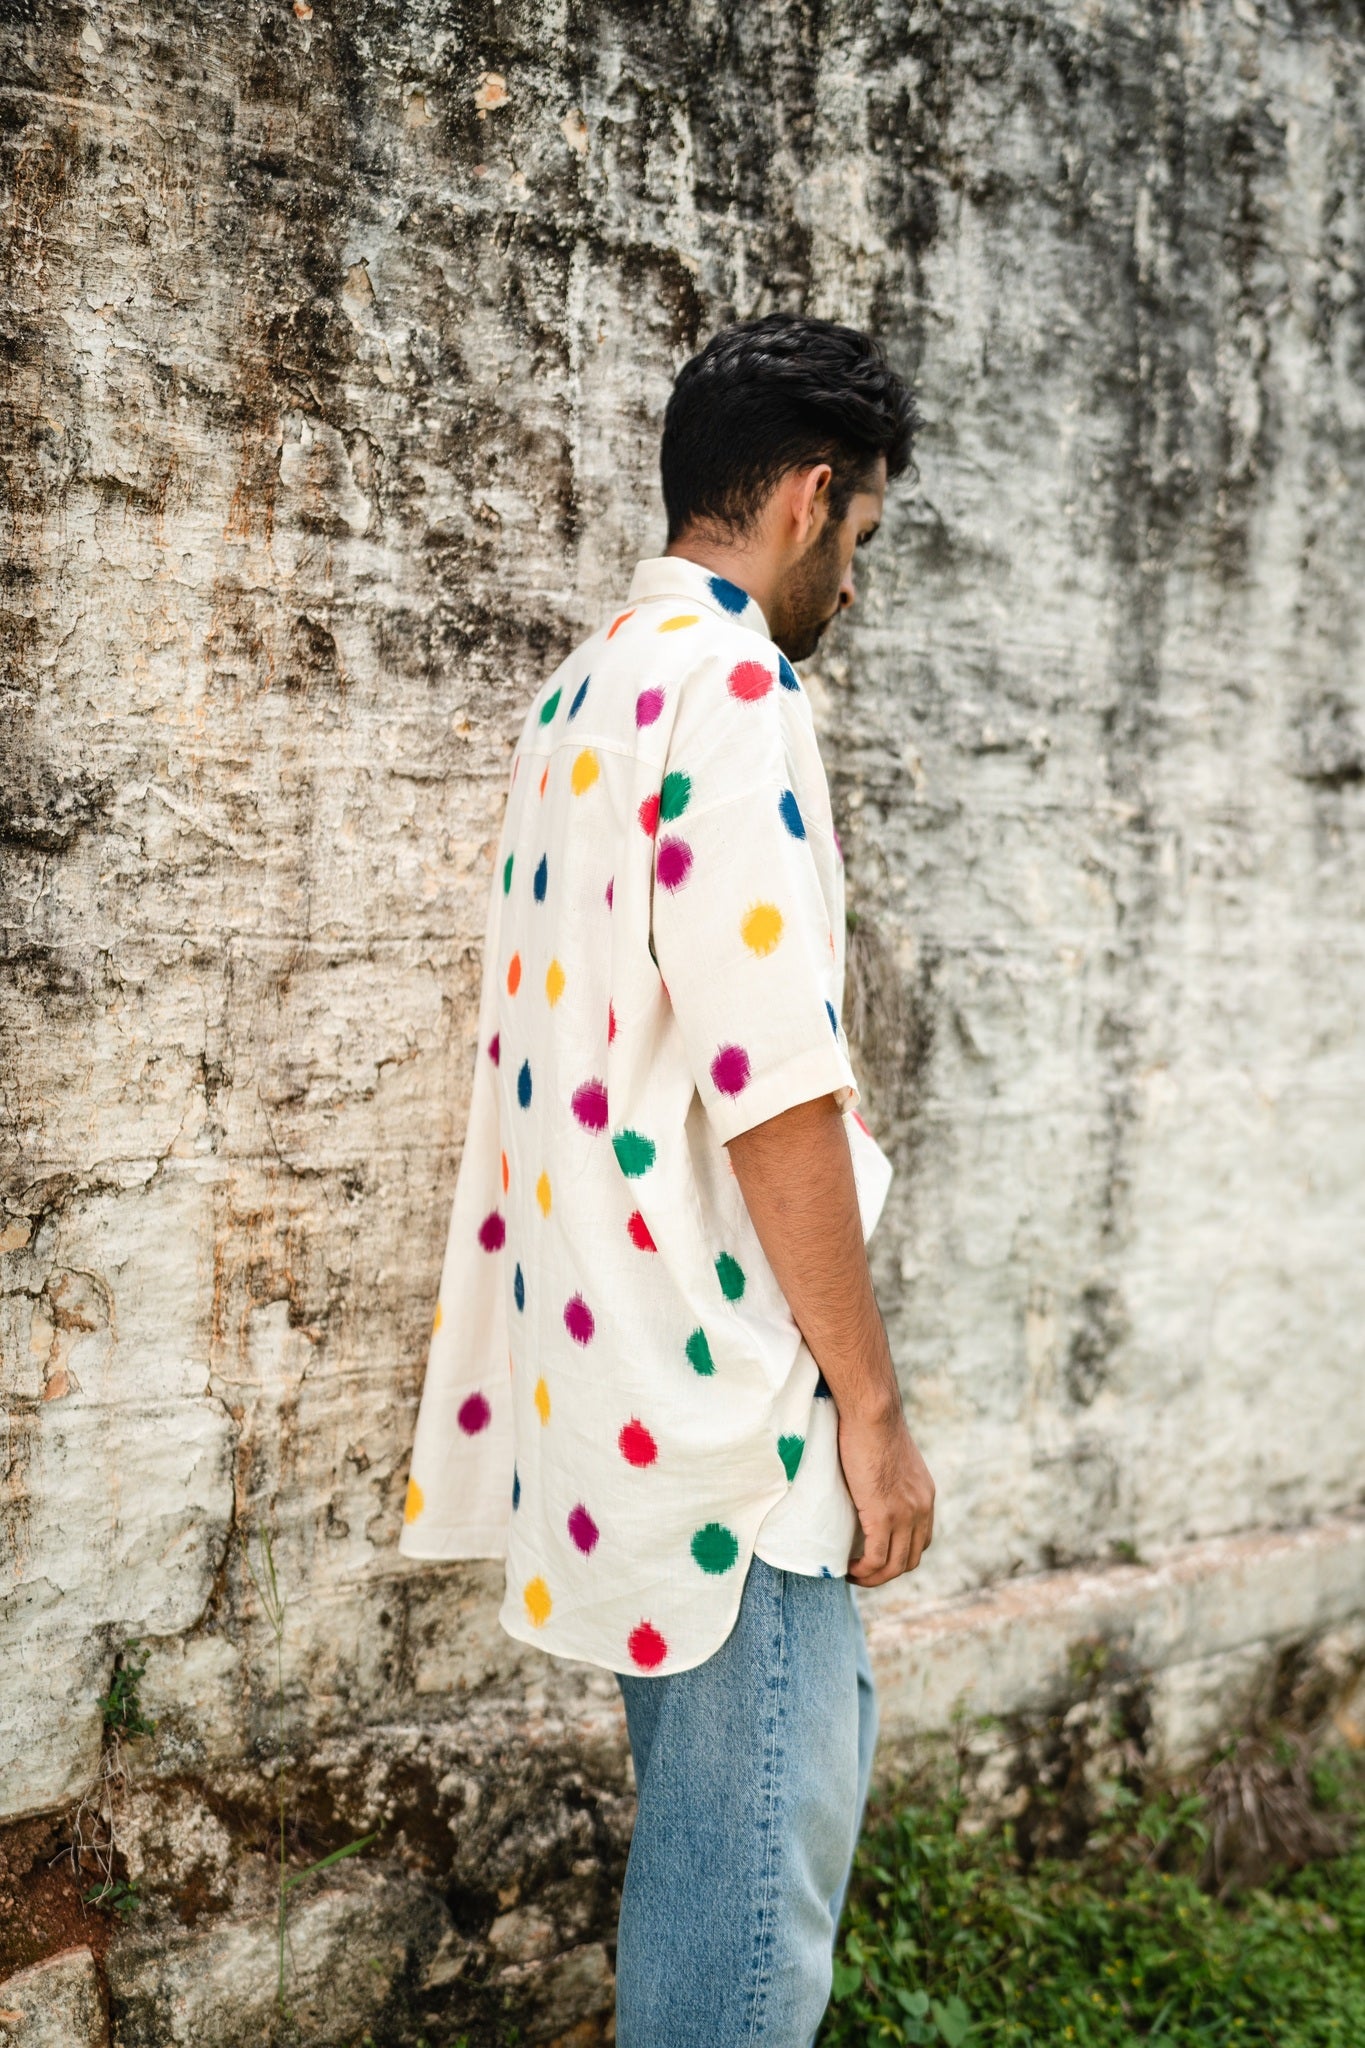 Rangeela Men's Polka Shirt, handwoven from breathable cotton, boasts lasting vibrant colors from special dyeing. Relish traditional craftsmanship in classic style.